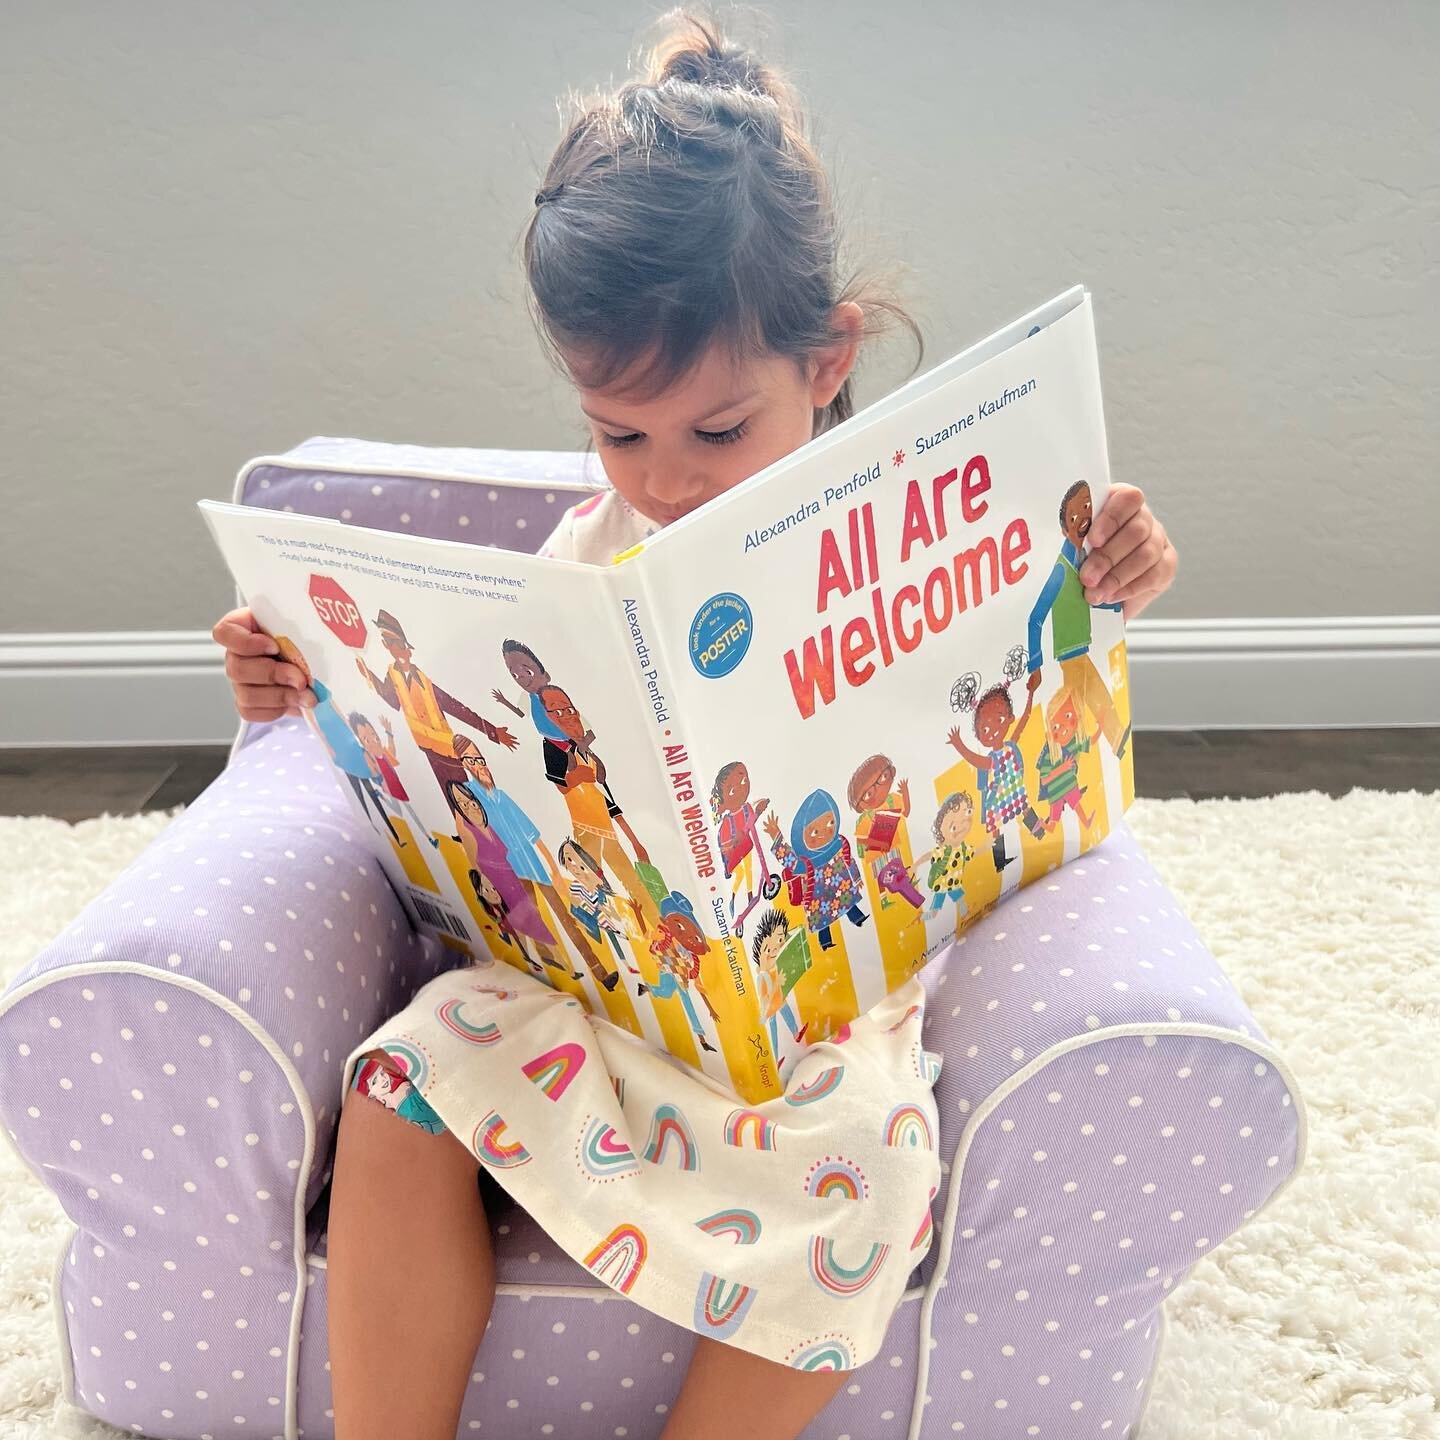 Reading Corner | All Are Welcome

Many of us are in the process of getting our kids ready to start school. Ajooni starts preschool next week, and I've been talking to her a lot about her new school, new teacher, and new friends. A great way to do thi